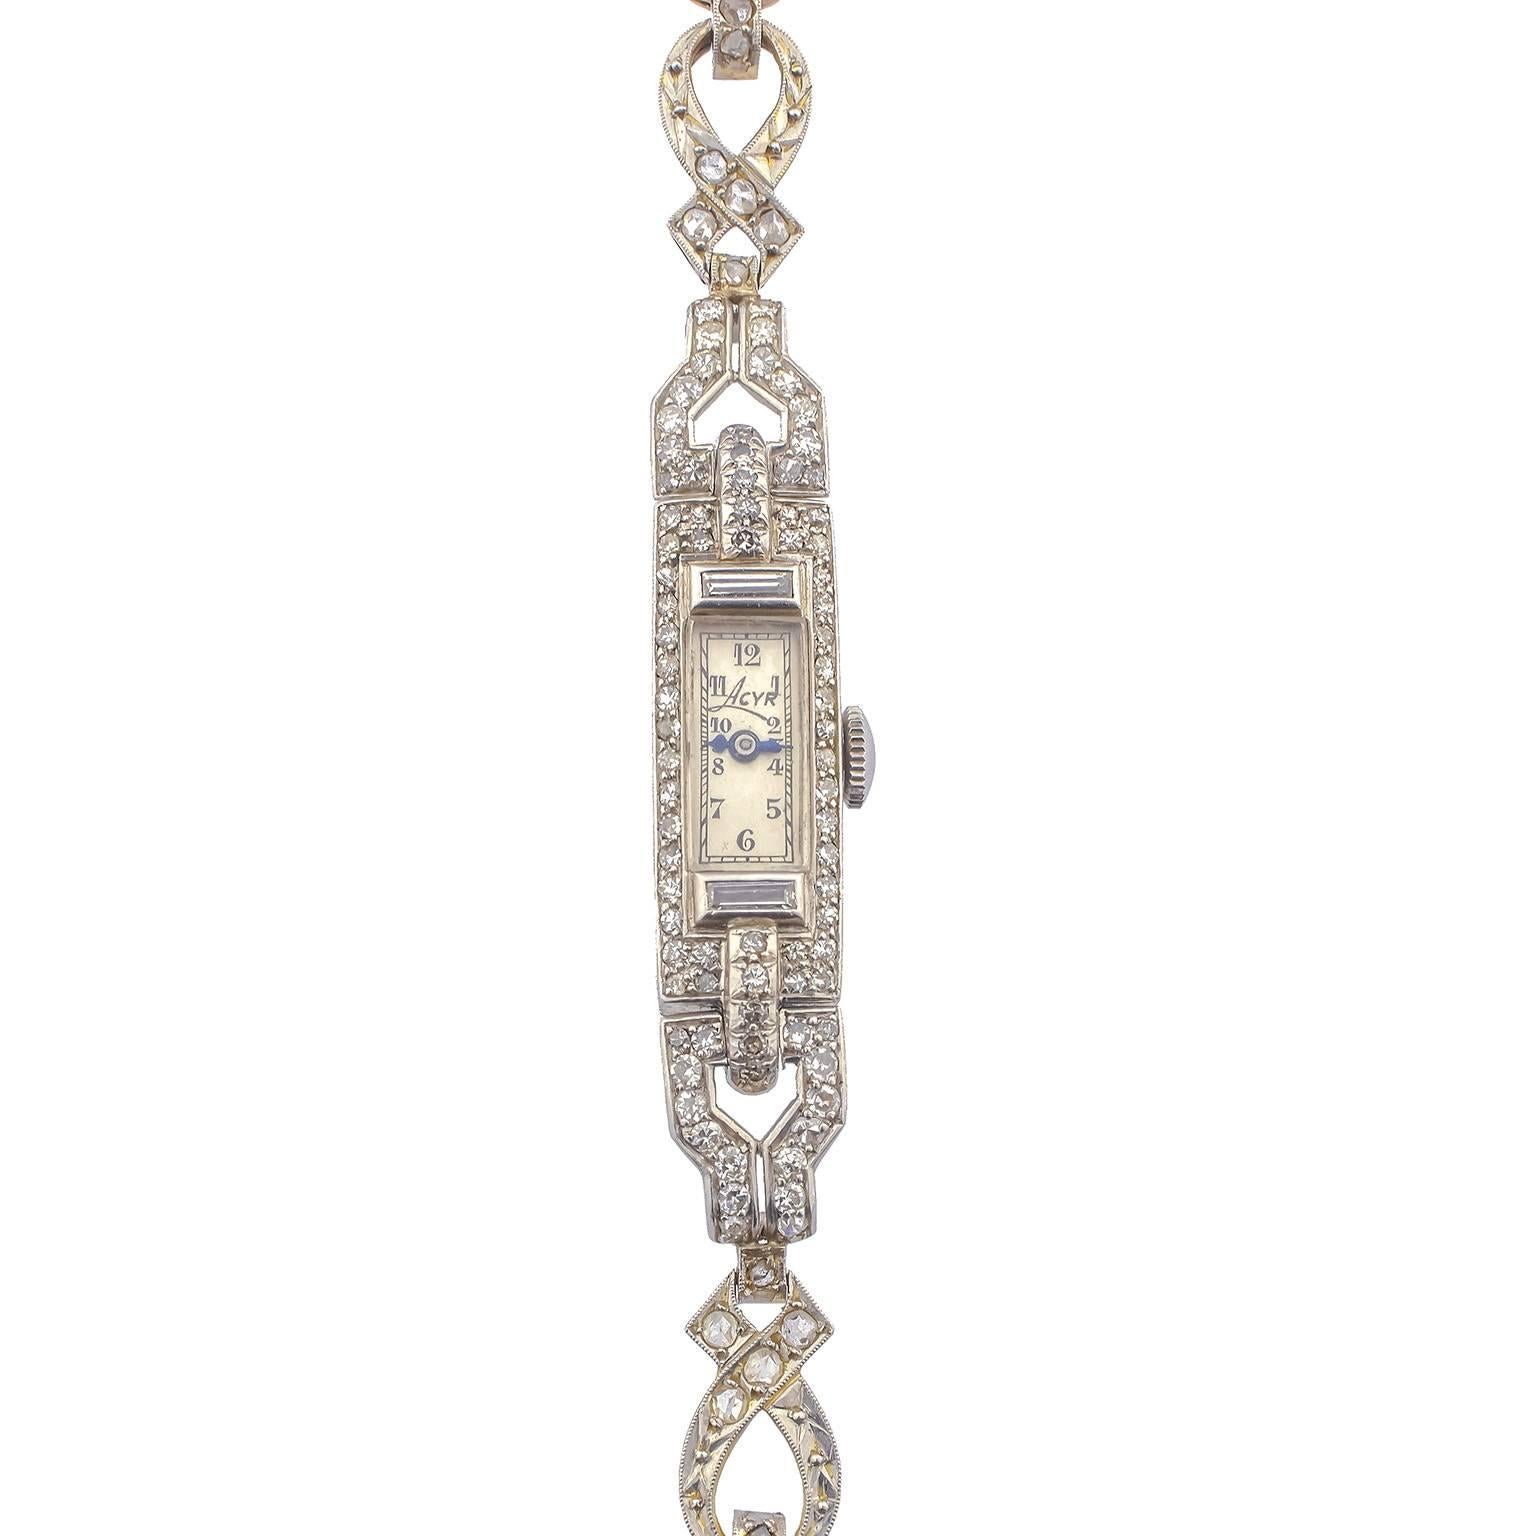 Acyr Wristwatch from the early 20th century, in platinum and gold with a wristband made in platinum-topped gold, set with 110 rose, baguette and round brilliant cut diamonds, totalling 1.60 carats.